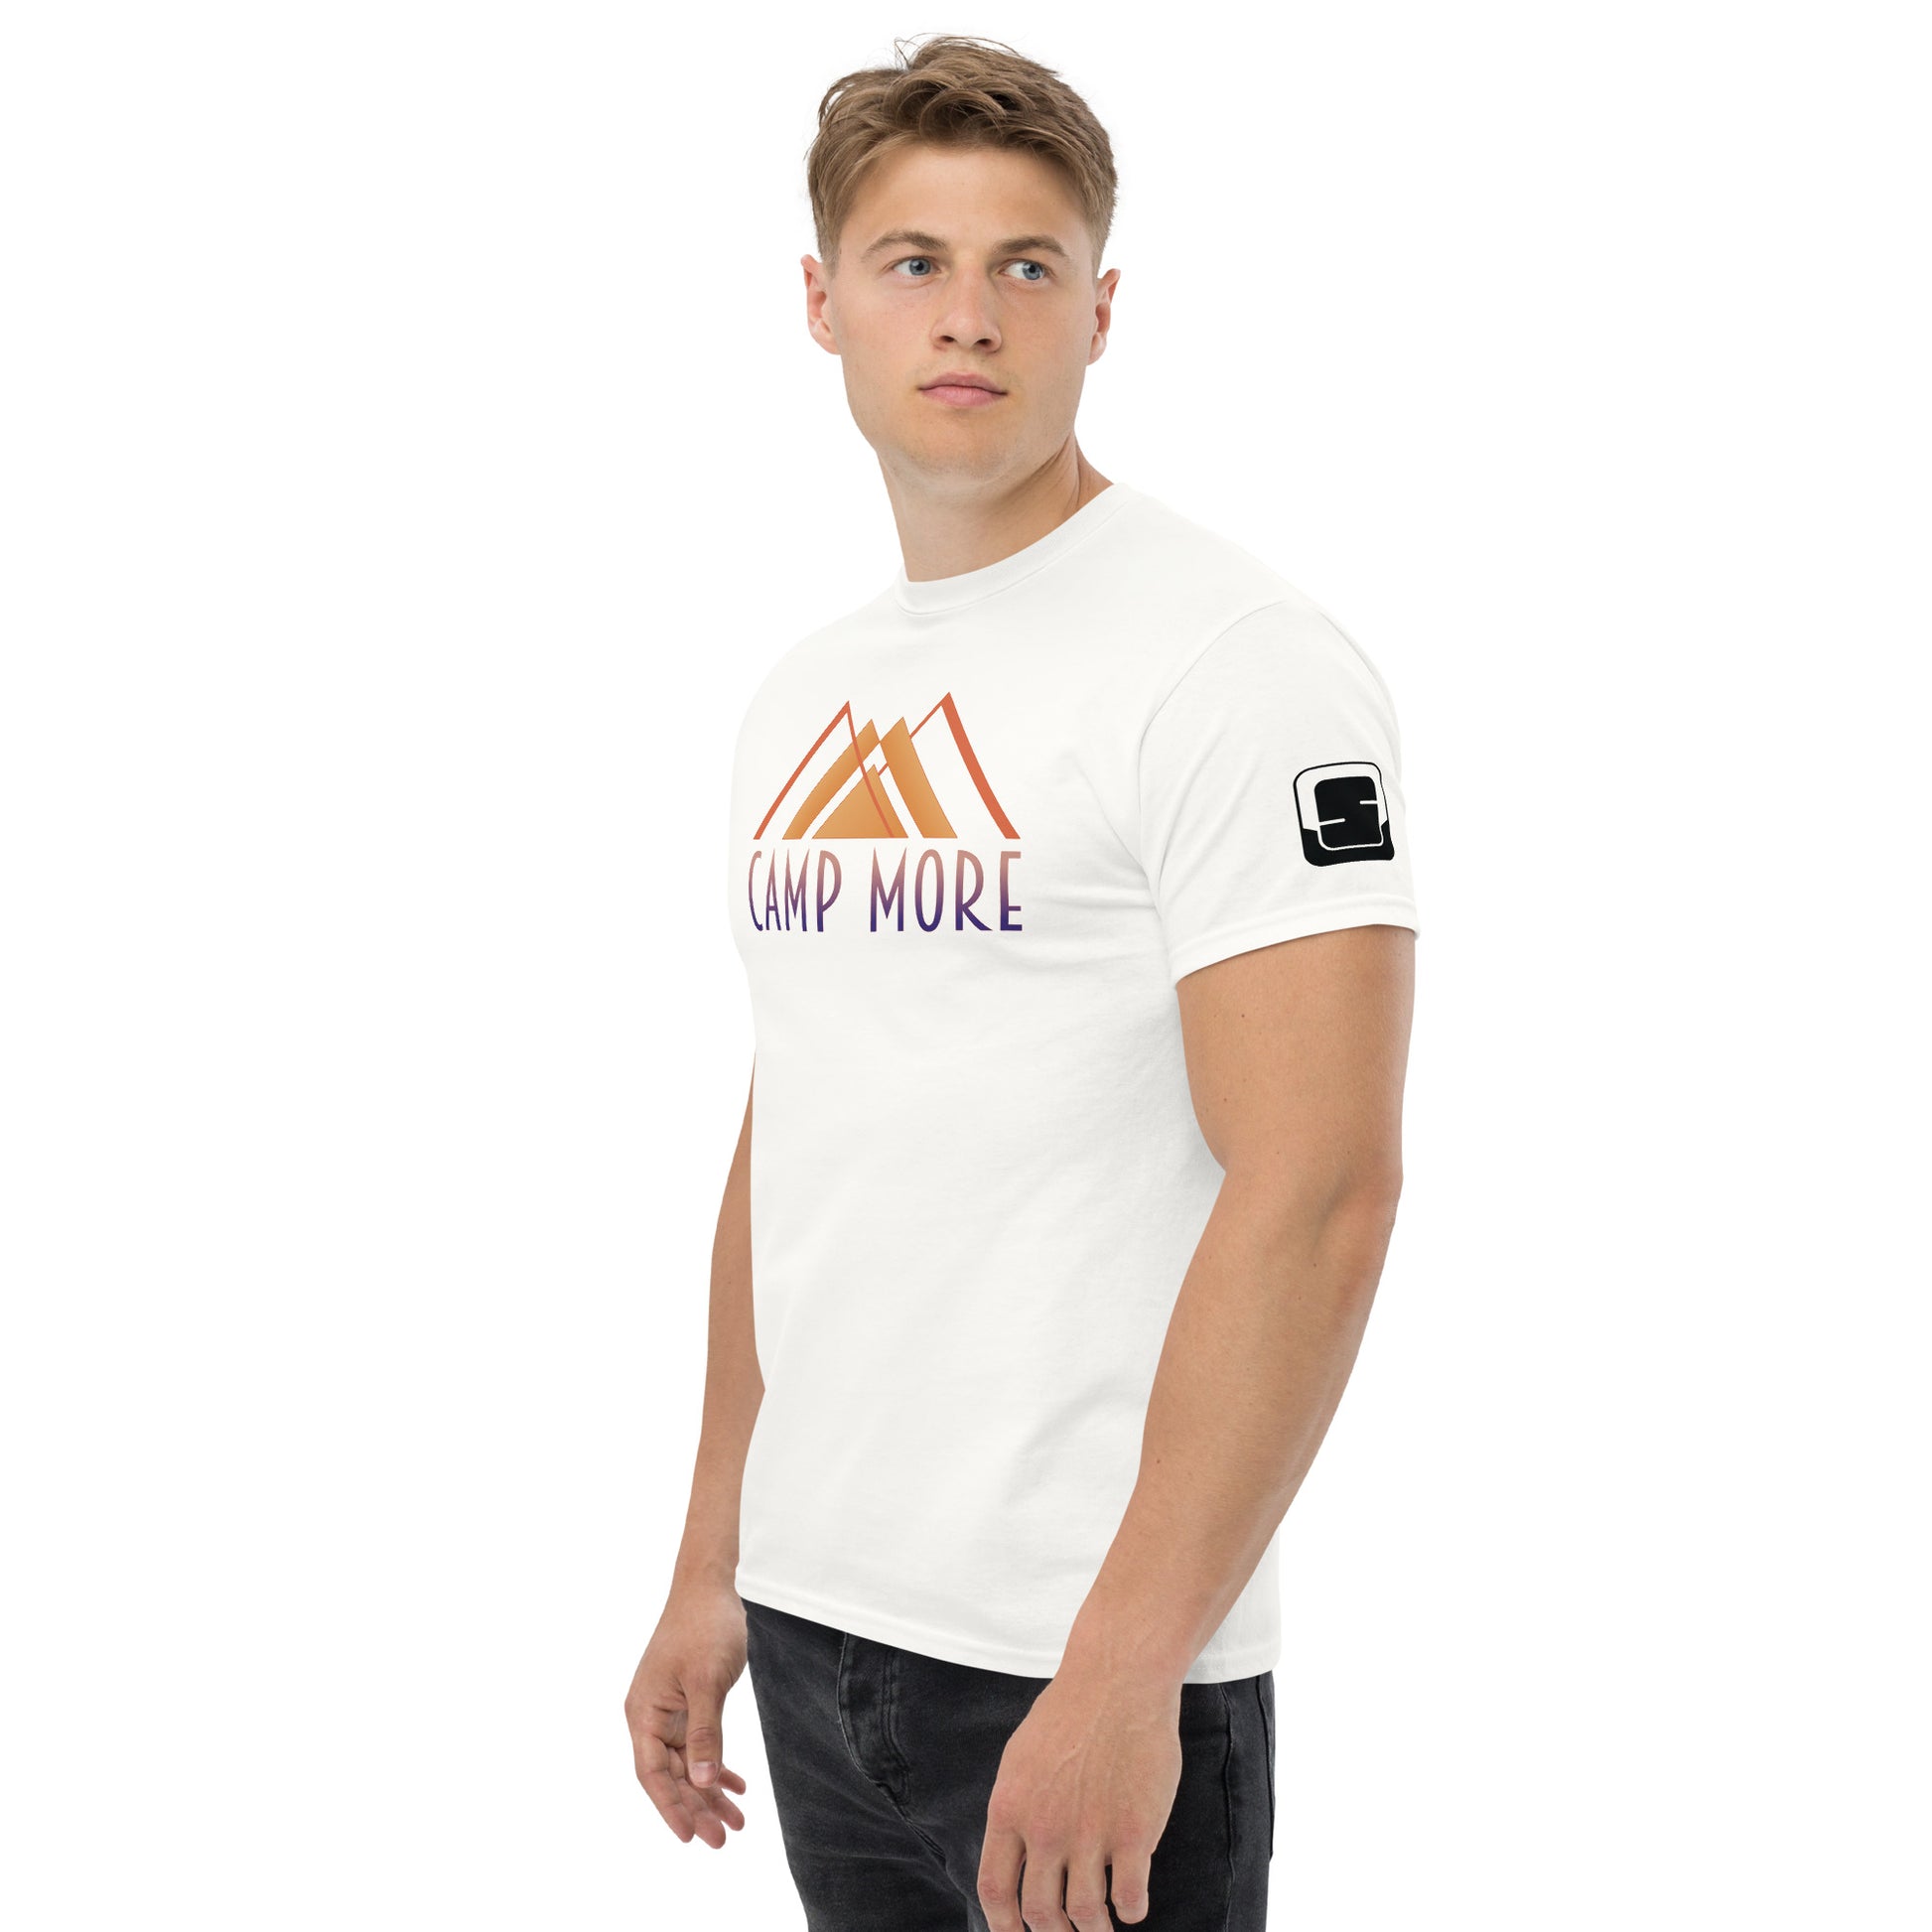 Confident young man in a white t-shirt with 'CAMP MORE' written above an abstrict mountain graphic in orange and purple. There is also a small square logo patch on the sleeve. This shirt is paired with dark trousers, against a white background.